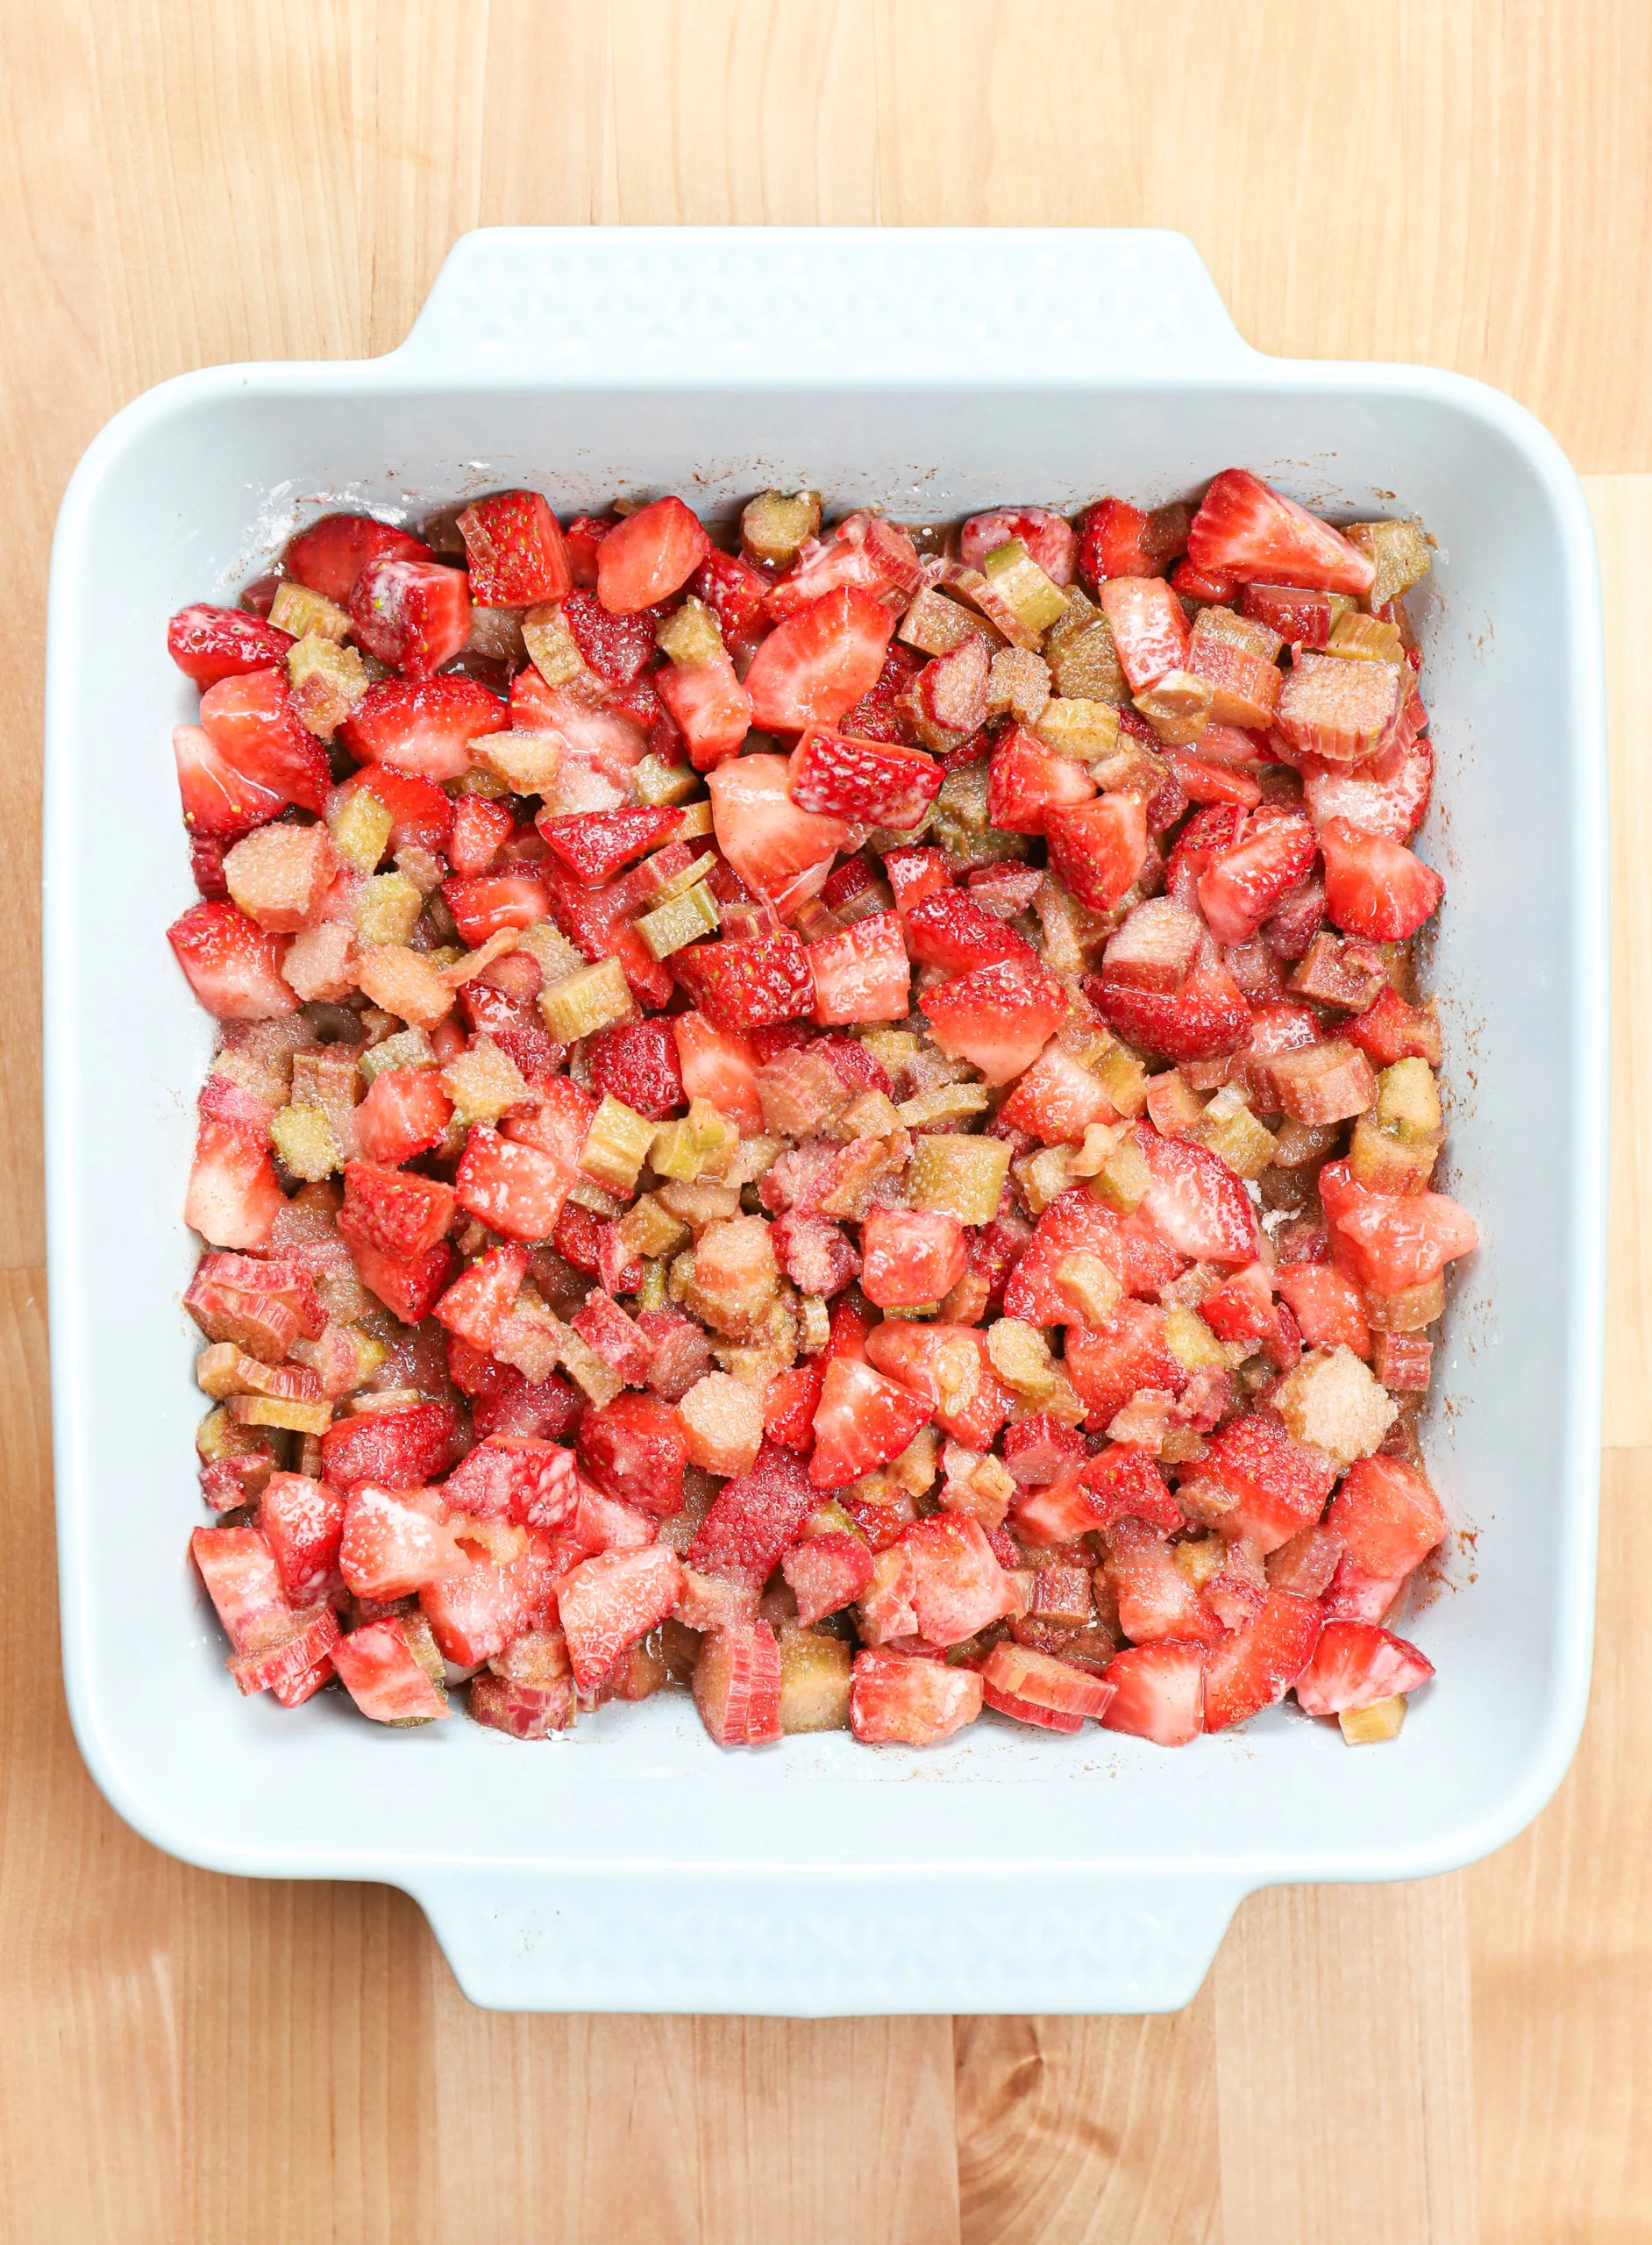 Overhead view of a dish of strawberry rhubarb crisp without the crisp topping.